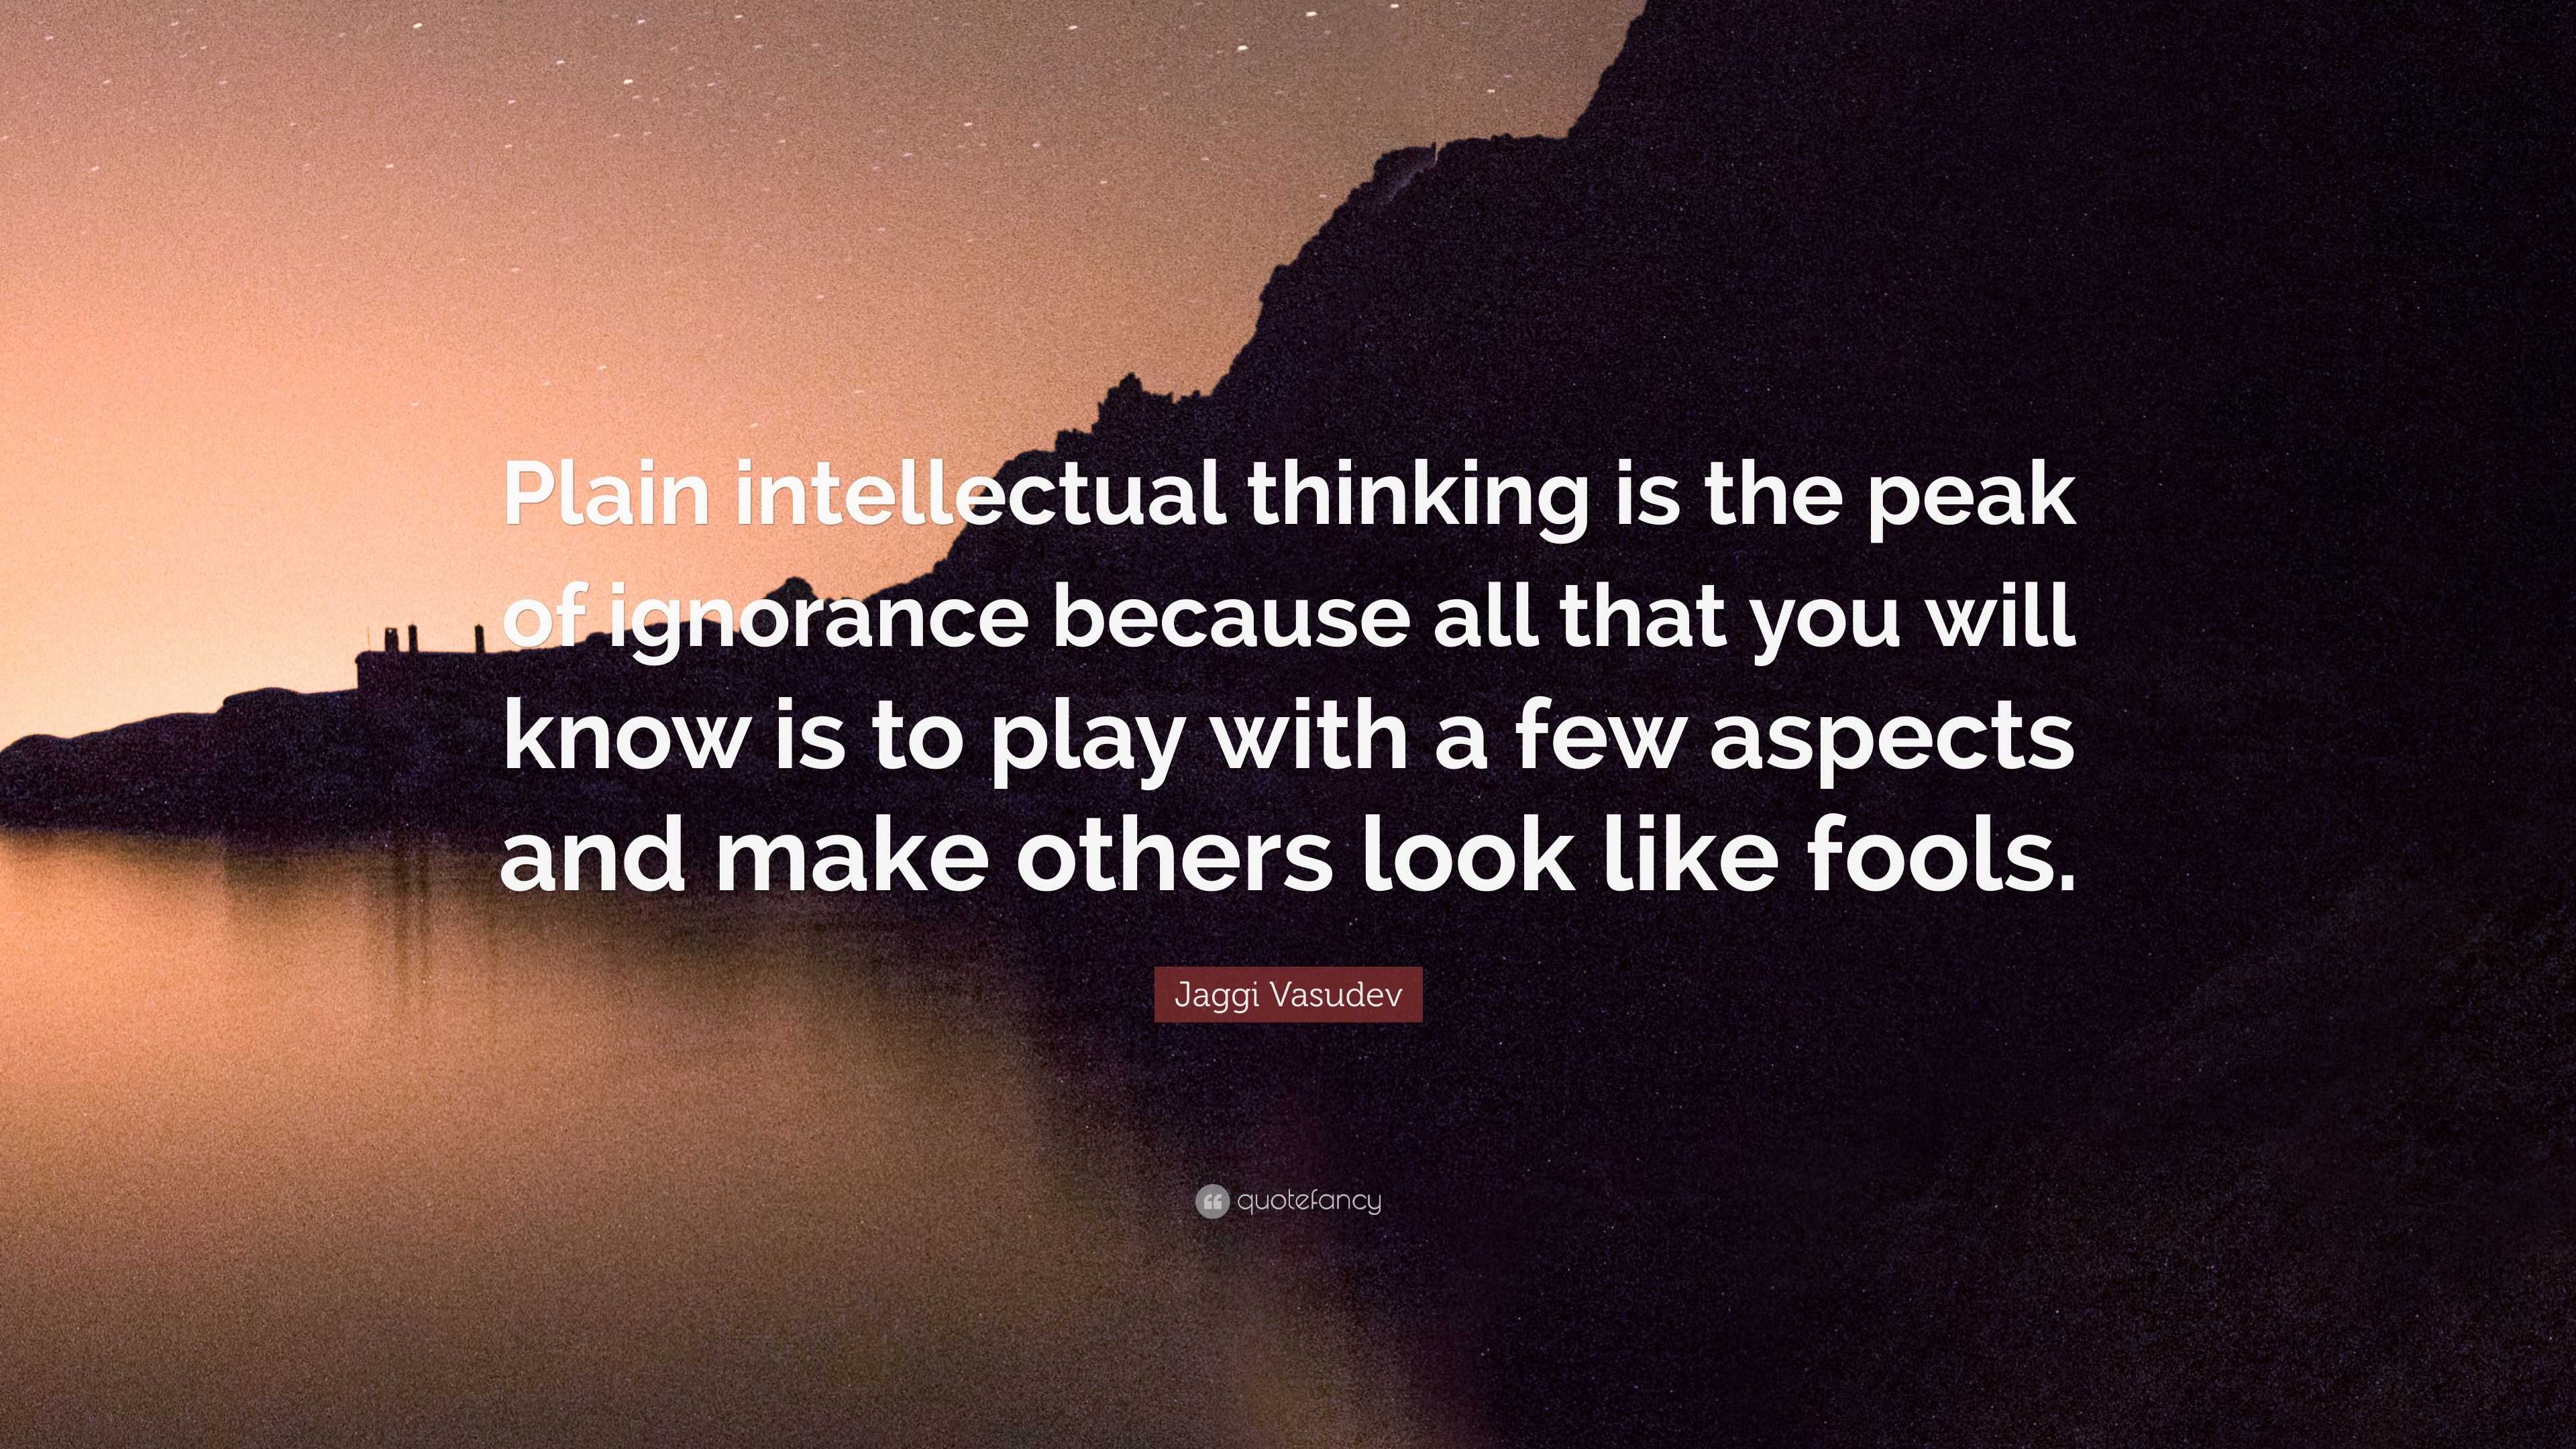 Jaggi Vasudev Quote “Plain intellectual thinking is the peak of ignorance because all that